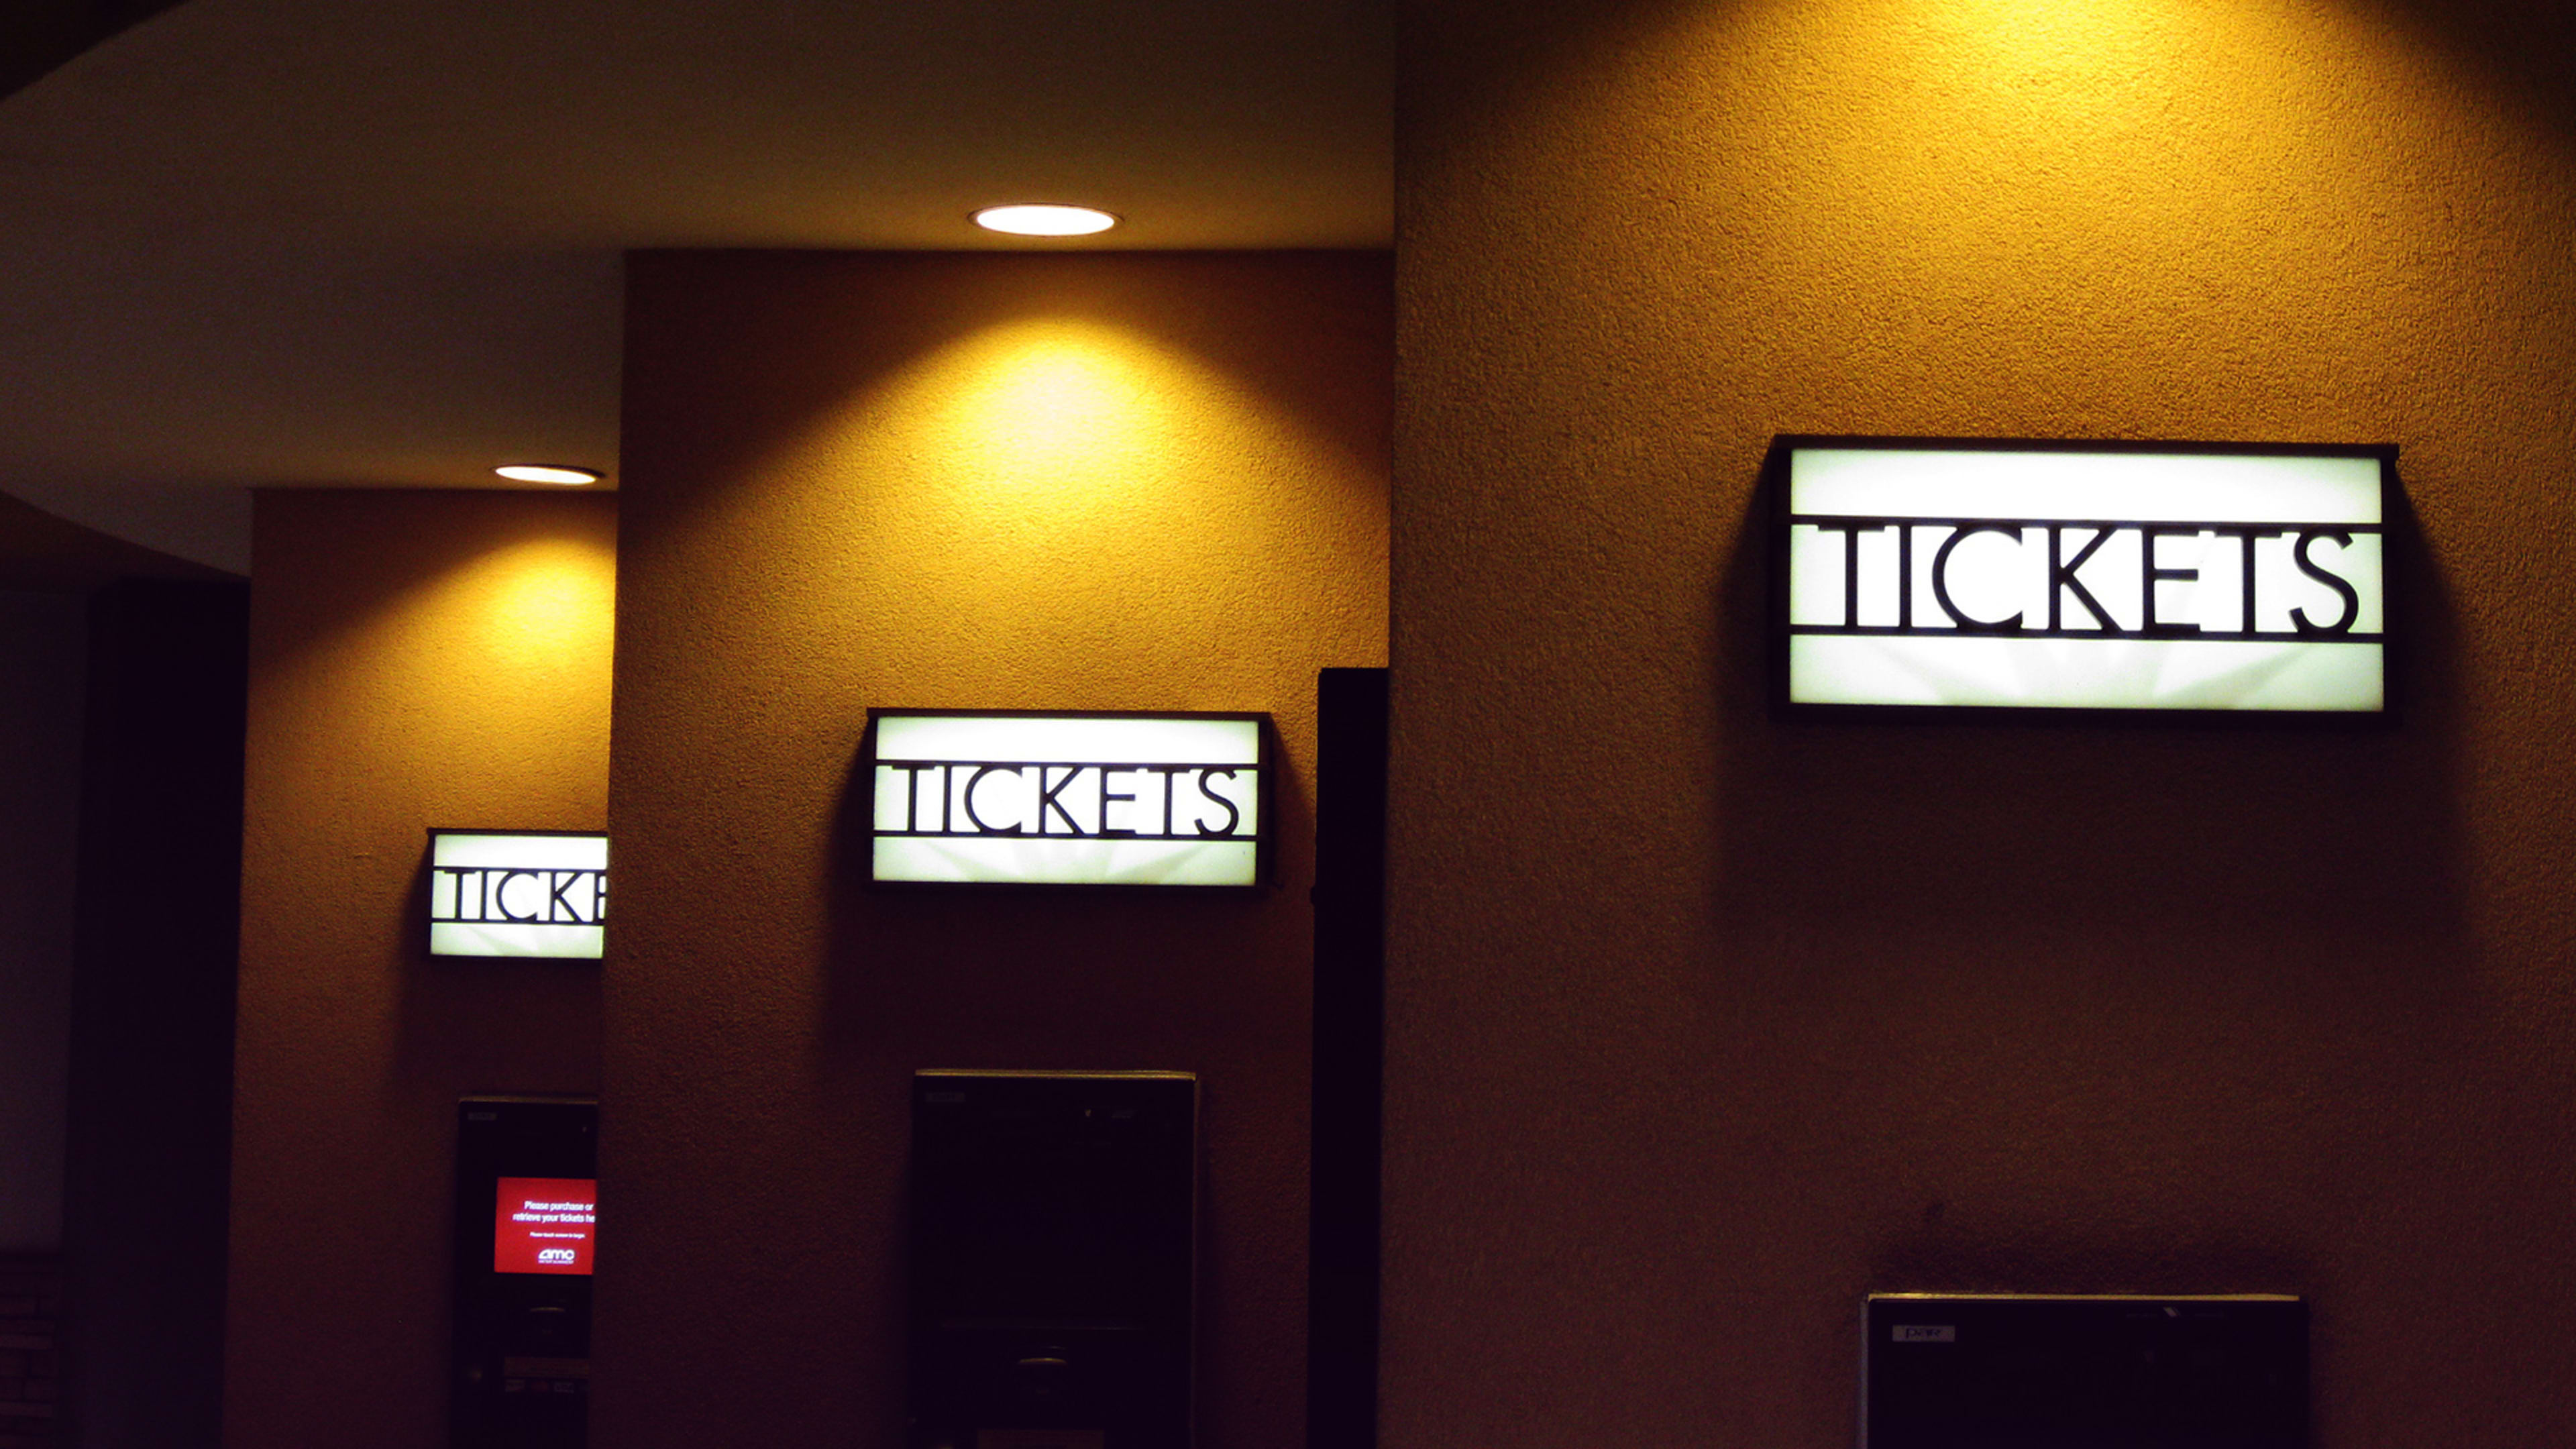 Chatting about movies on Facebook? A bot may drop in to sell you tickets